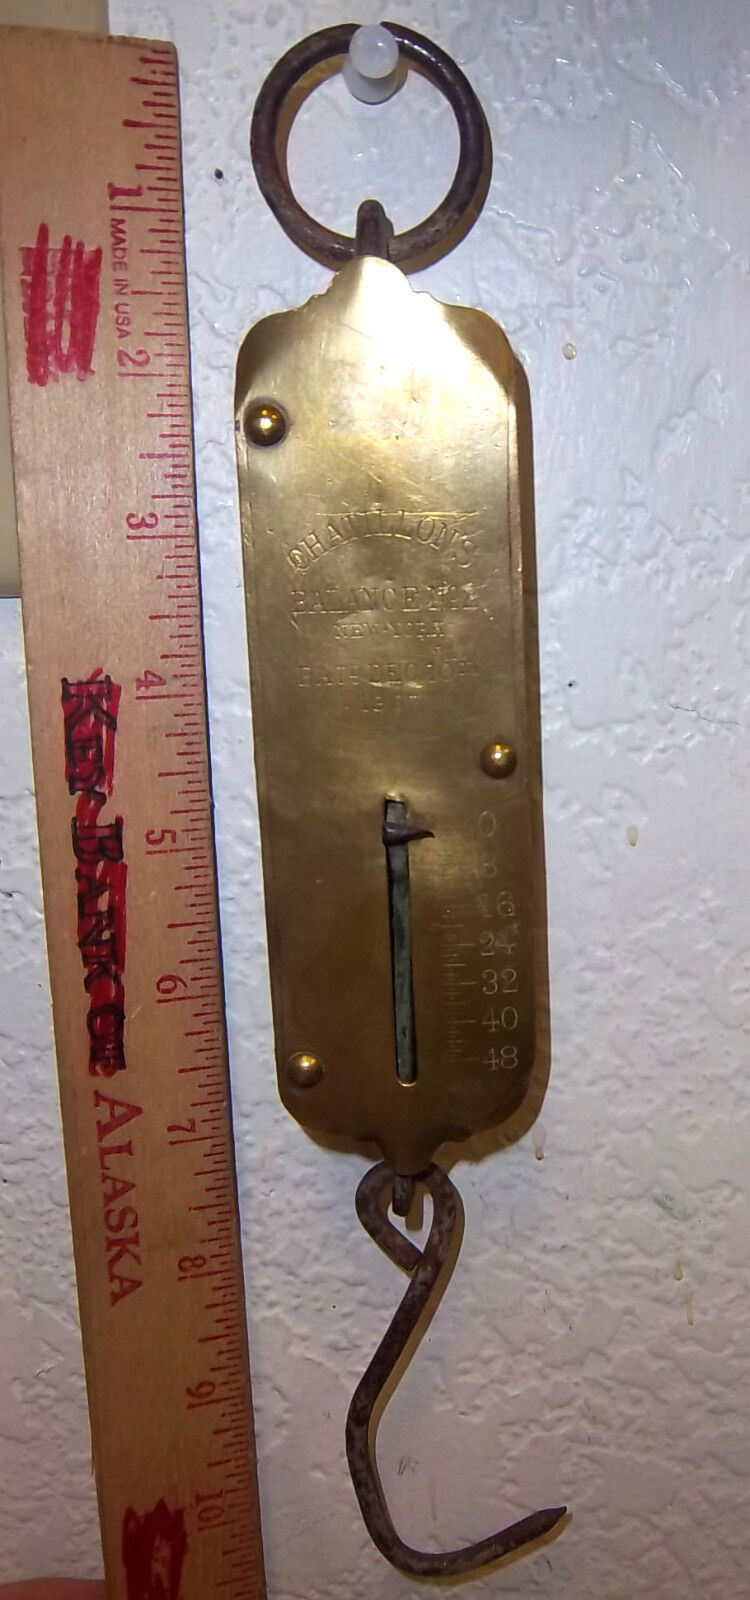 vintage Chatillons Ballance #2 48 pound brass scale, 1867 patent date, New York